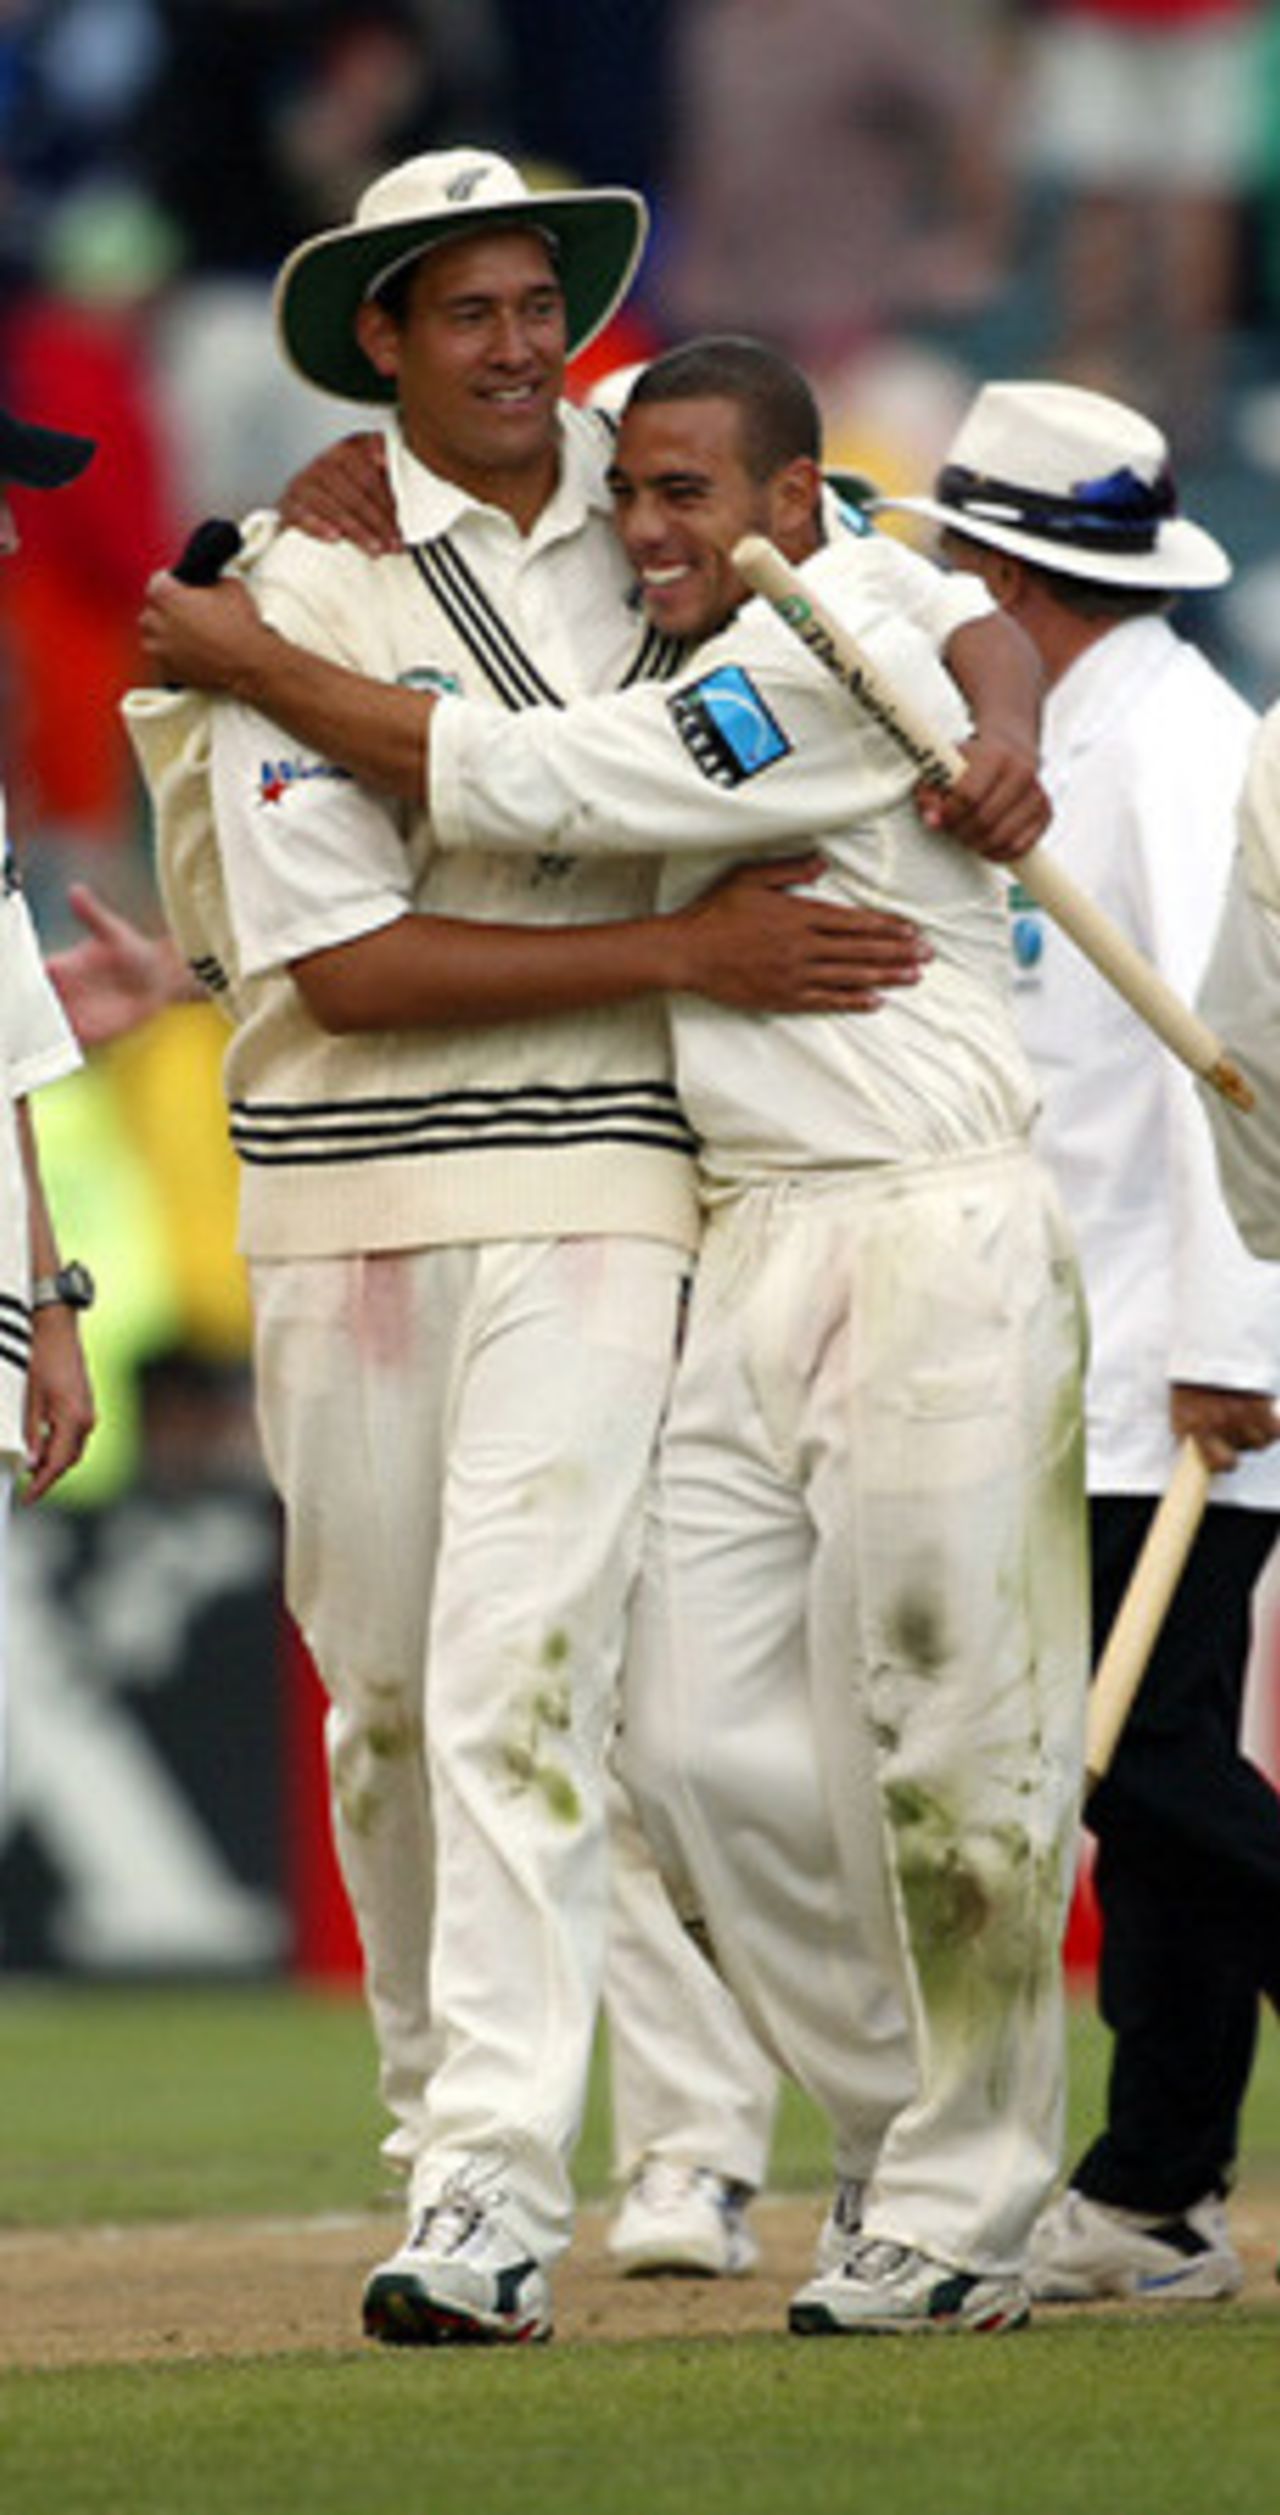 New Zealand player Daryl Tuffey (left) is hugged by team-mate Andre Adams as New Zealand win the match, beating England by 78 runs to draw the 3-Test series 1-1. 3rd Test: New Zealand v England at Eden Park, Auckland, 30 March-3 April 2002 (3 April 2002).